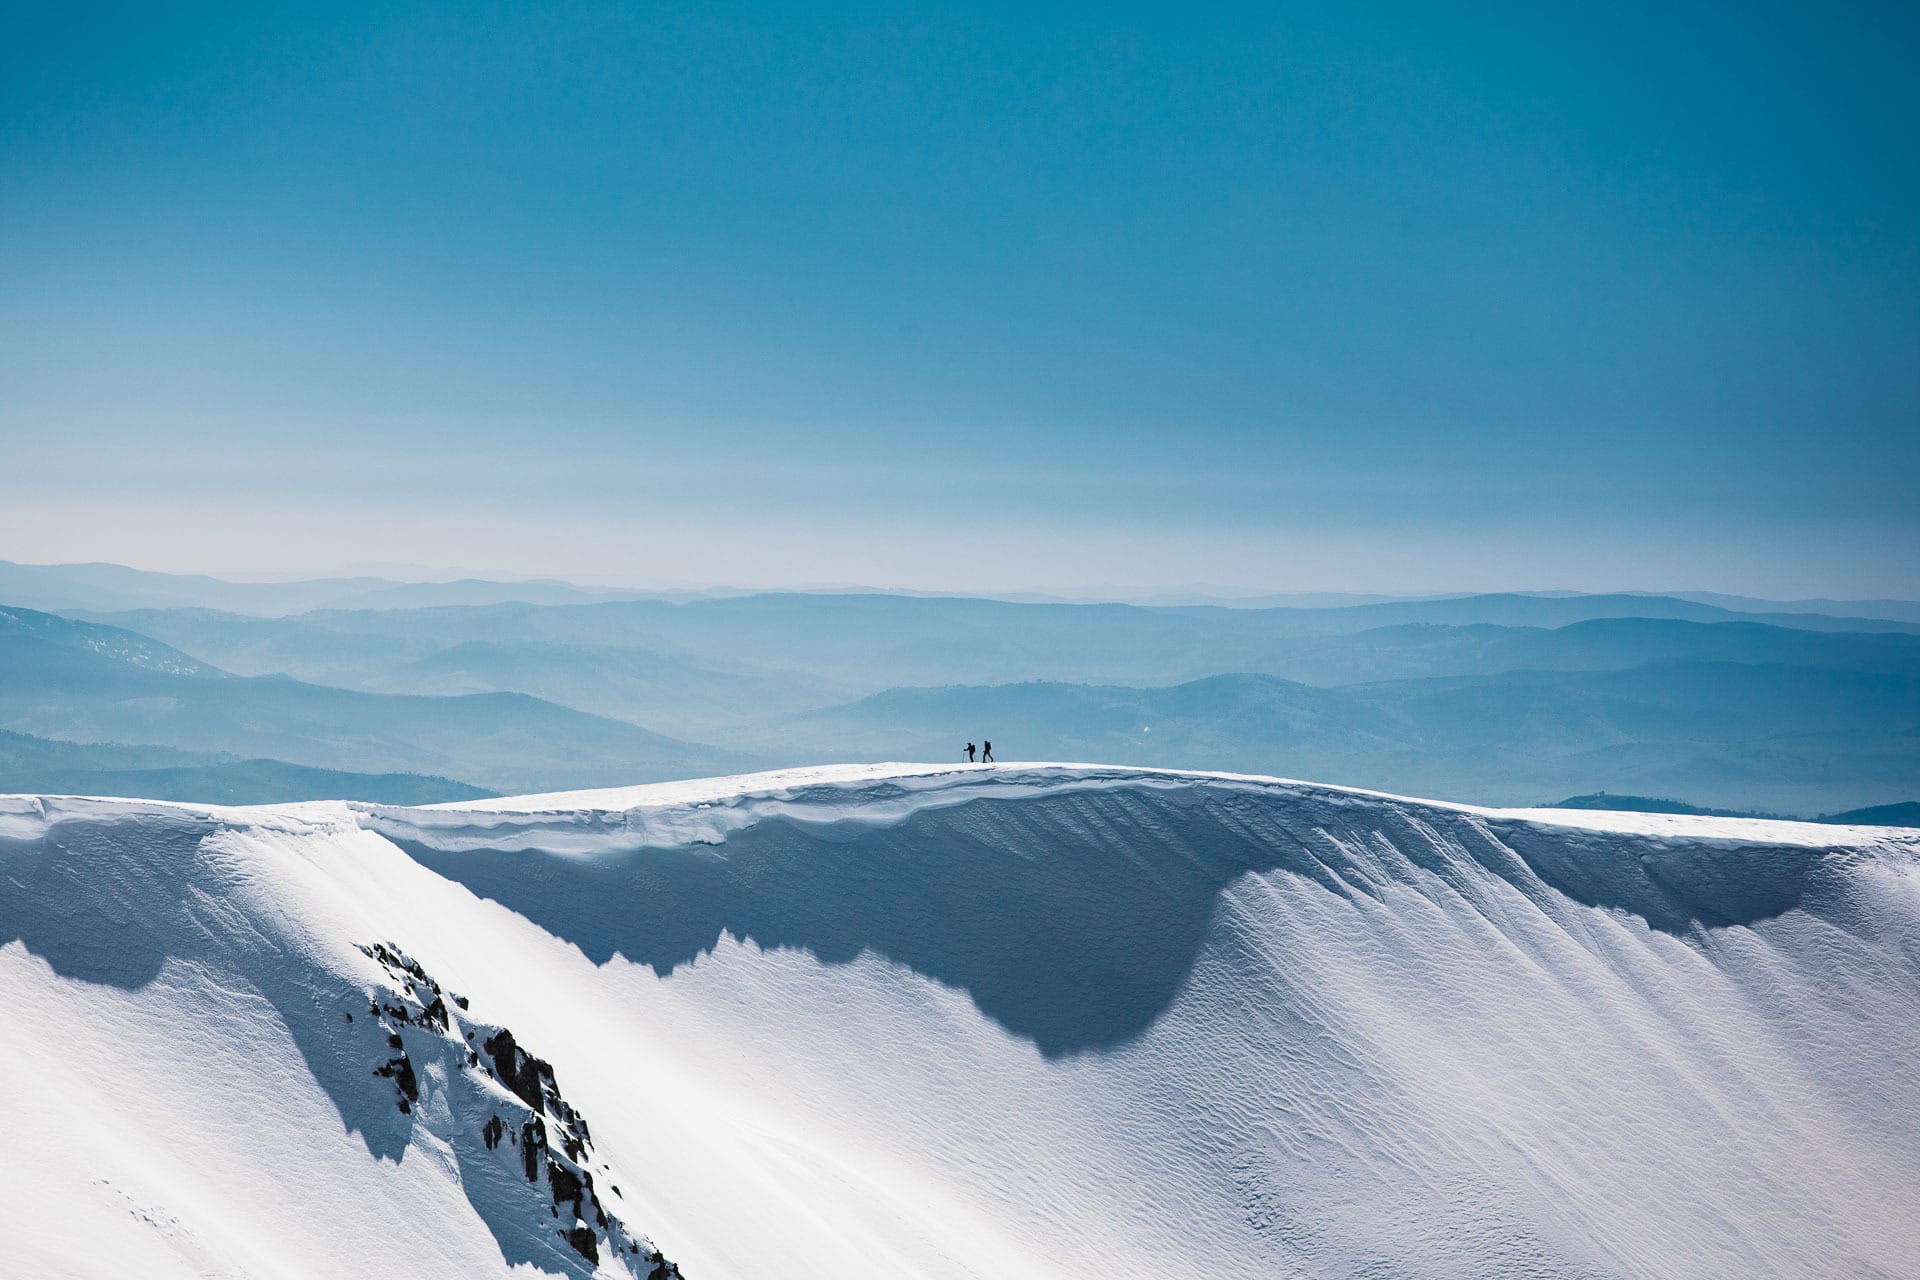 Sea to Summit in Australia – All In A Day's Work, guy williment, backcountry, snow, cornice, nsw